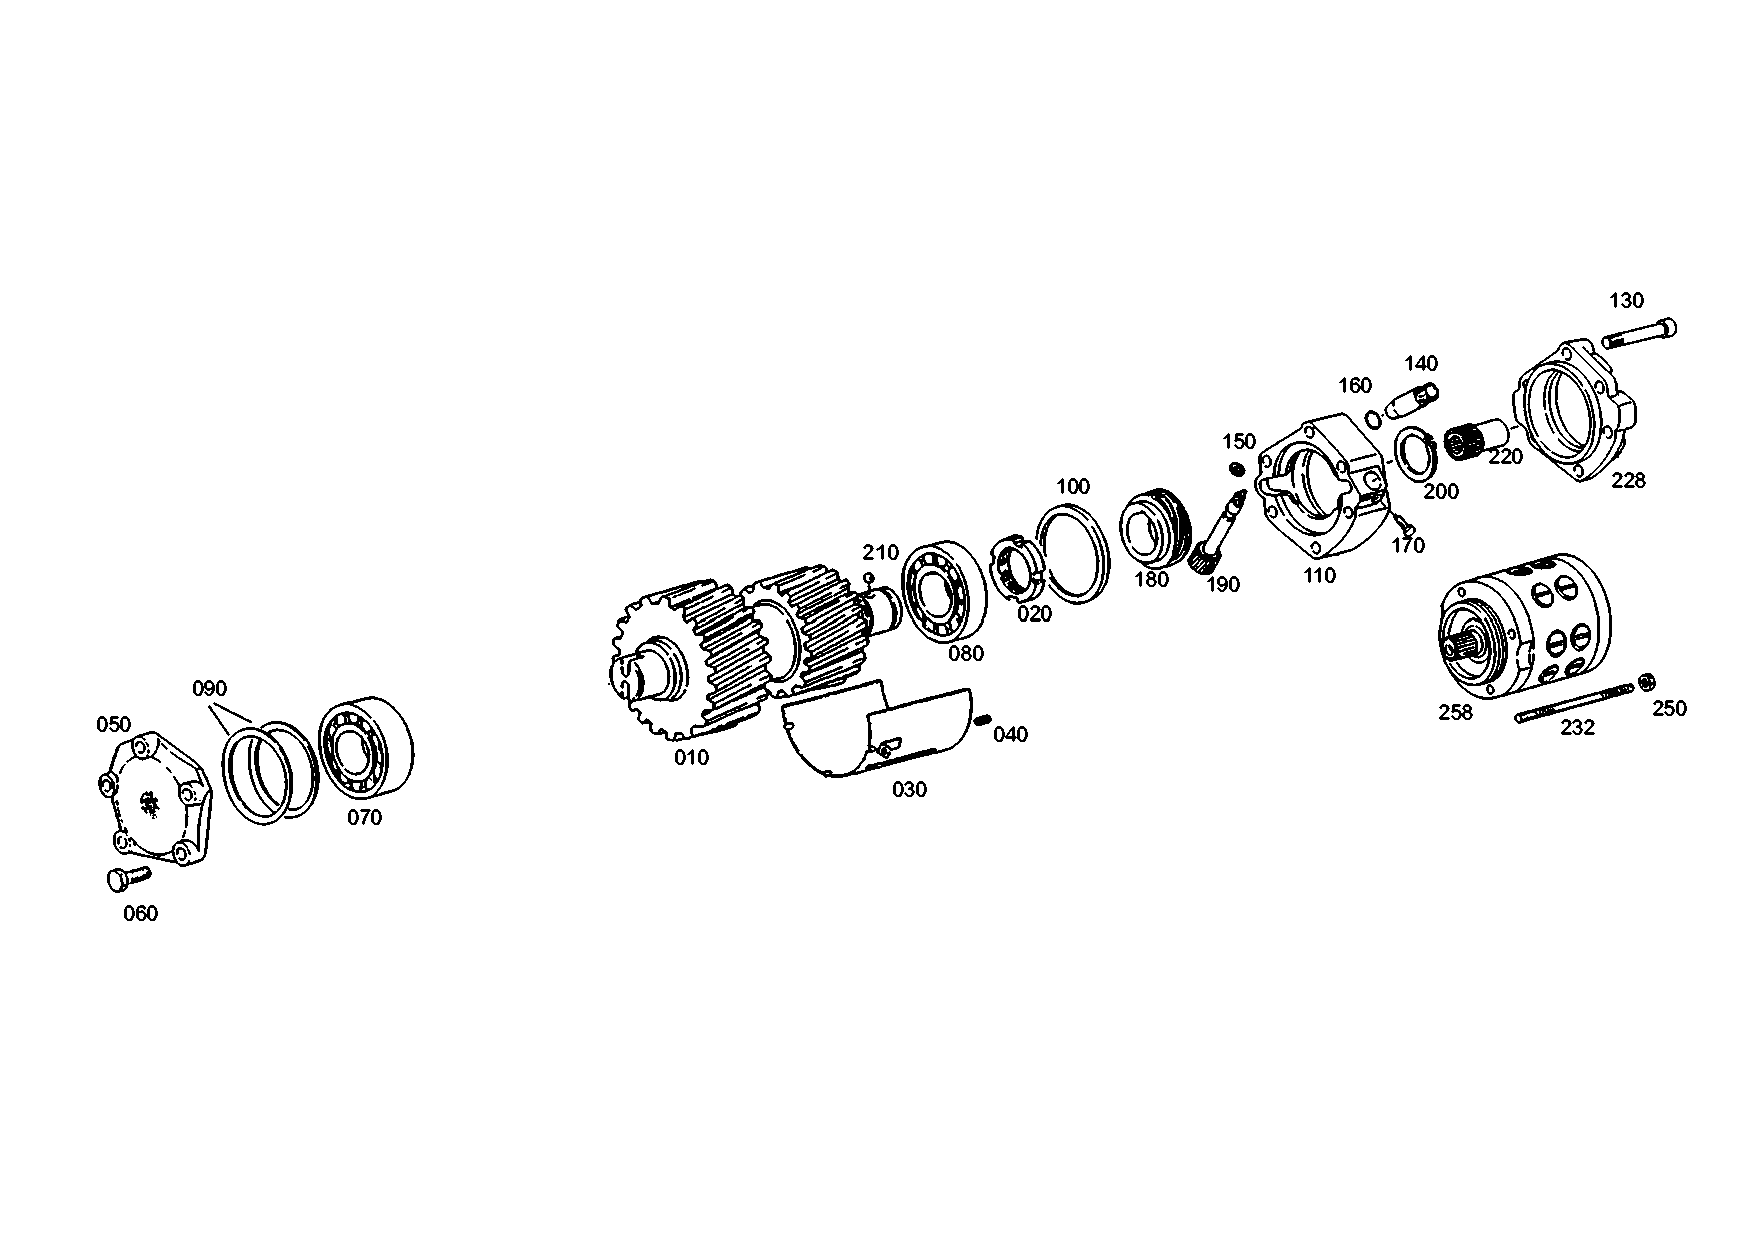 drawing for TITAN GMBH 199118250338 - PUMP CARRIER (figure 2)